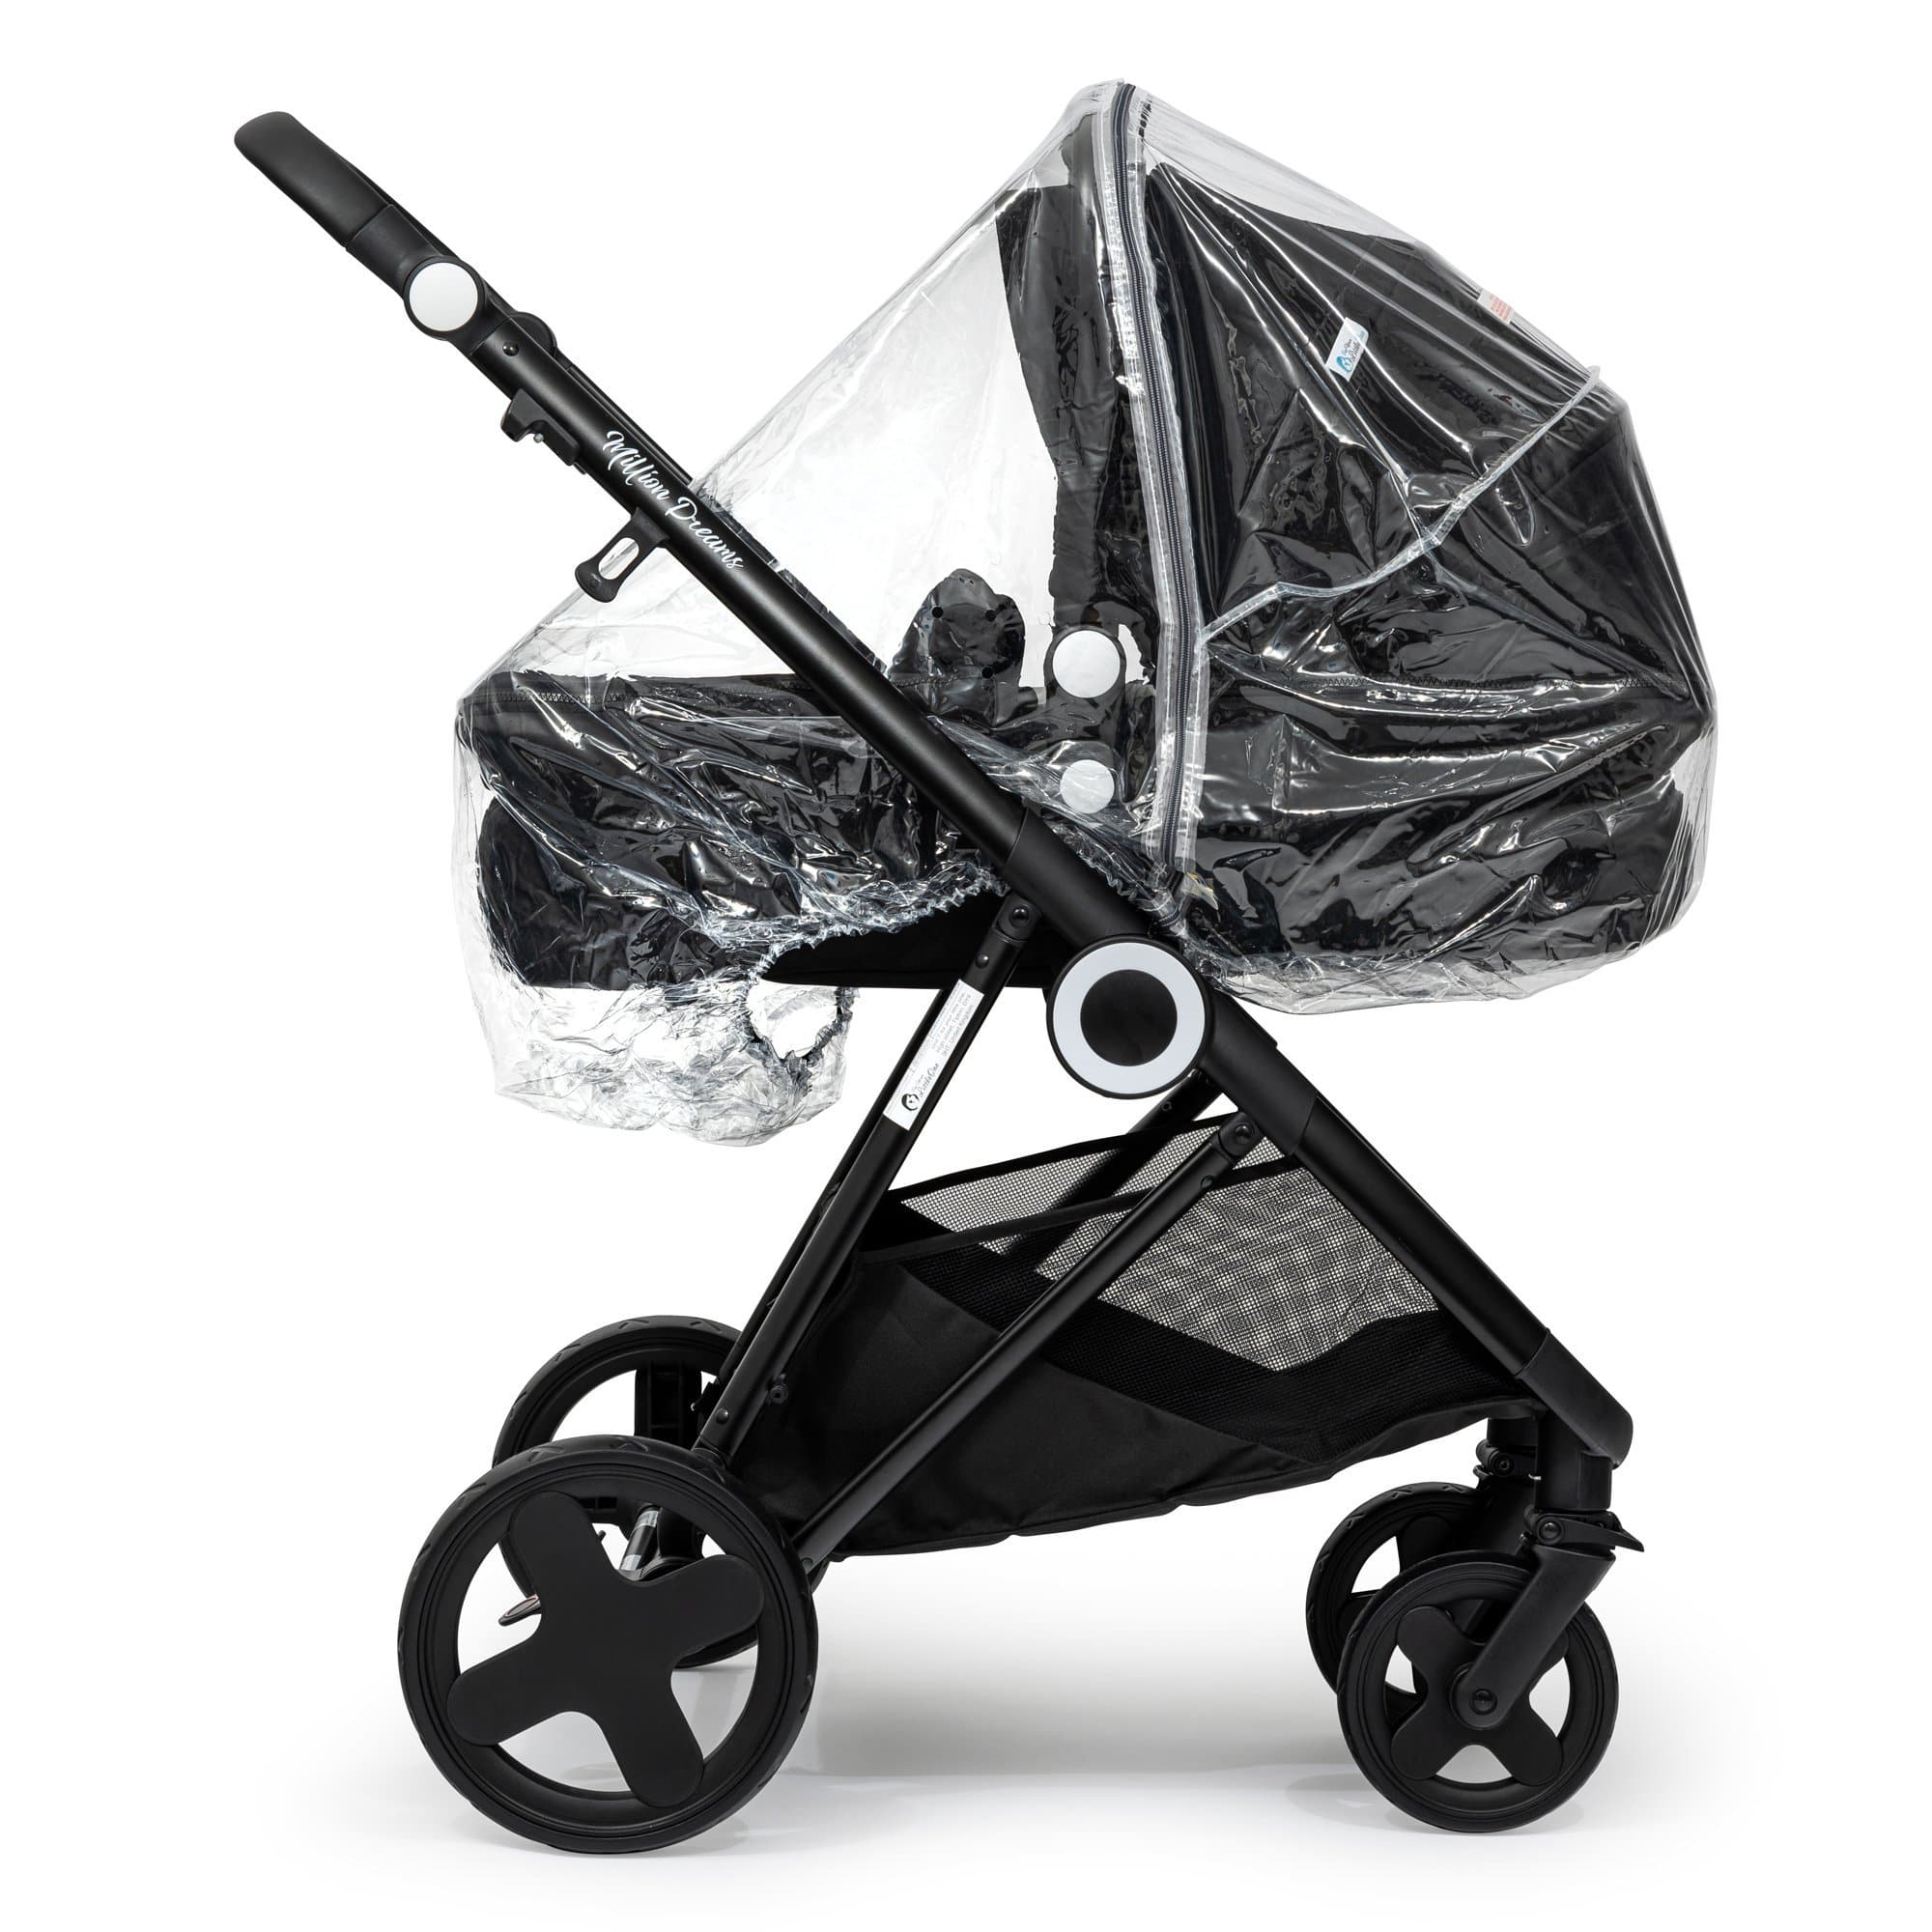 2 in 1 Rain Cover Compatible with Quax - Fits All Models - For Your Little One